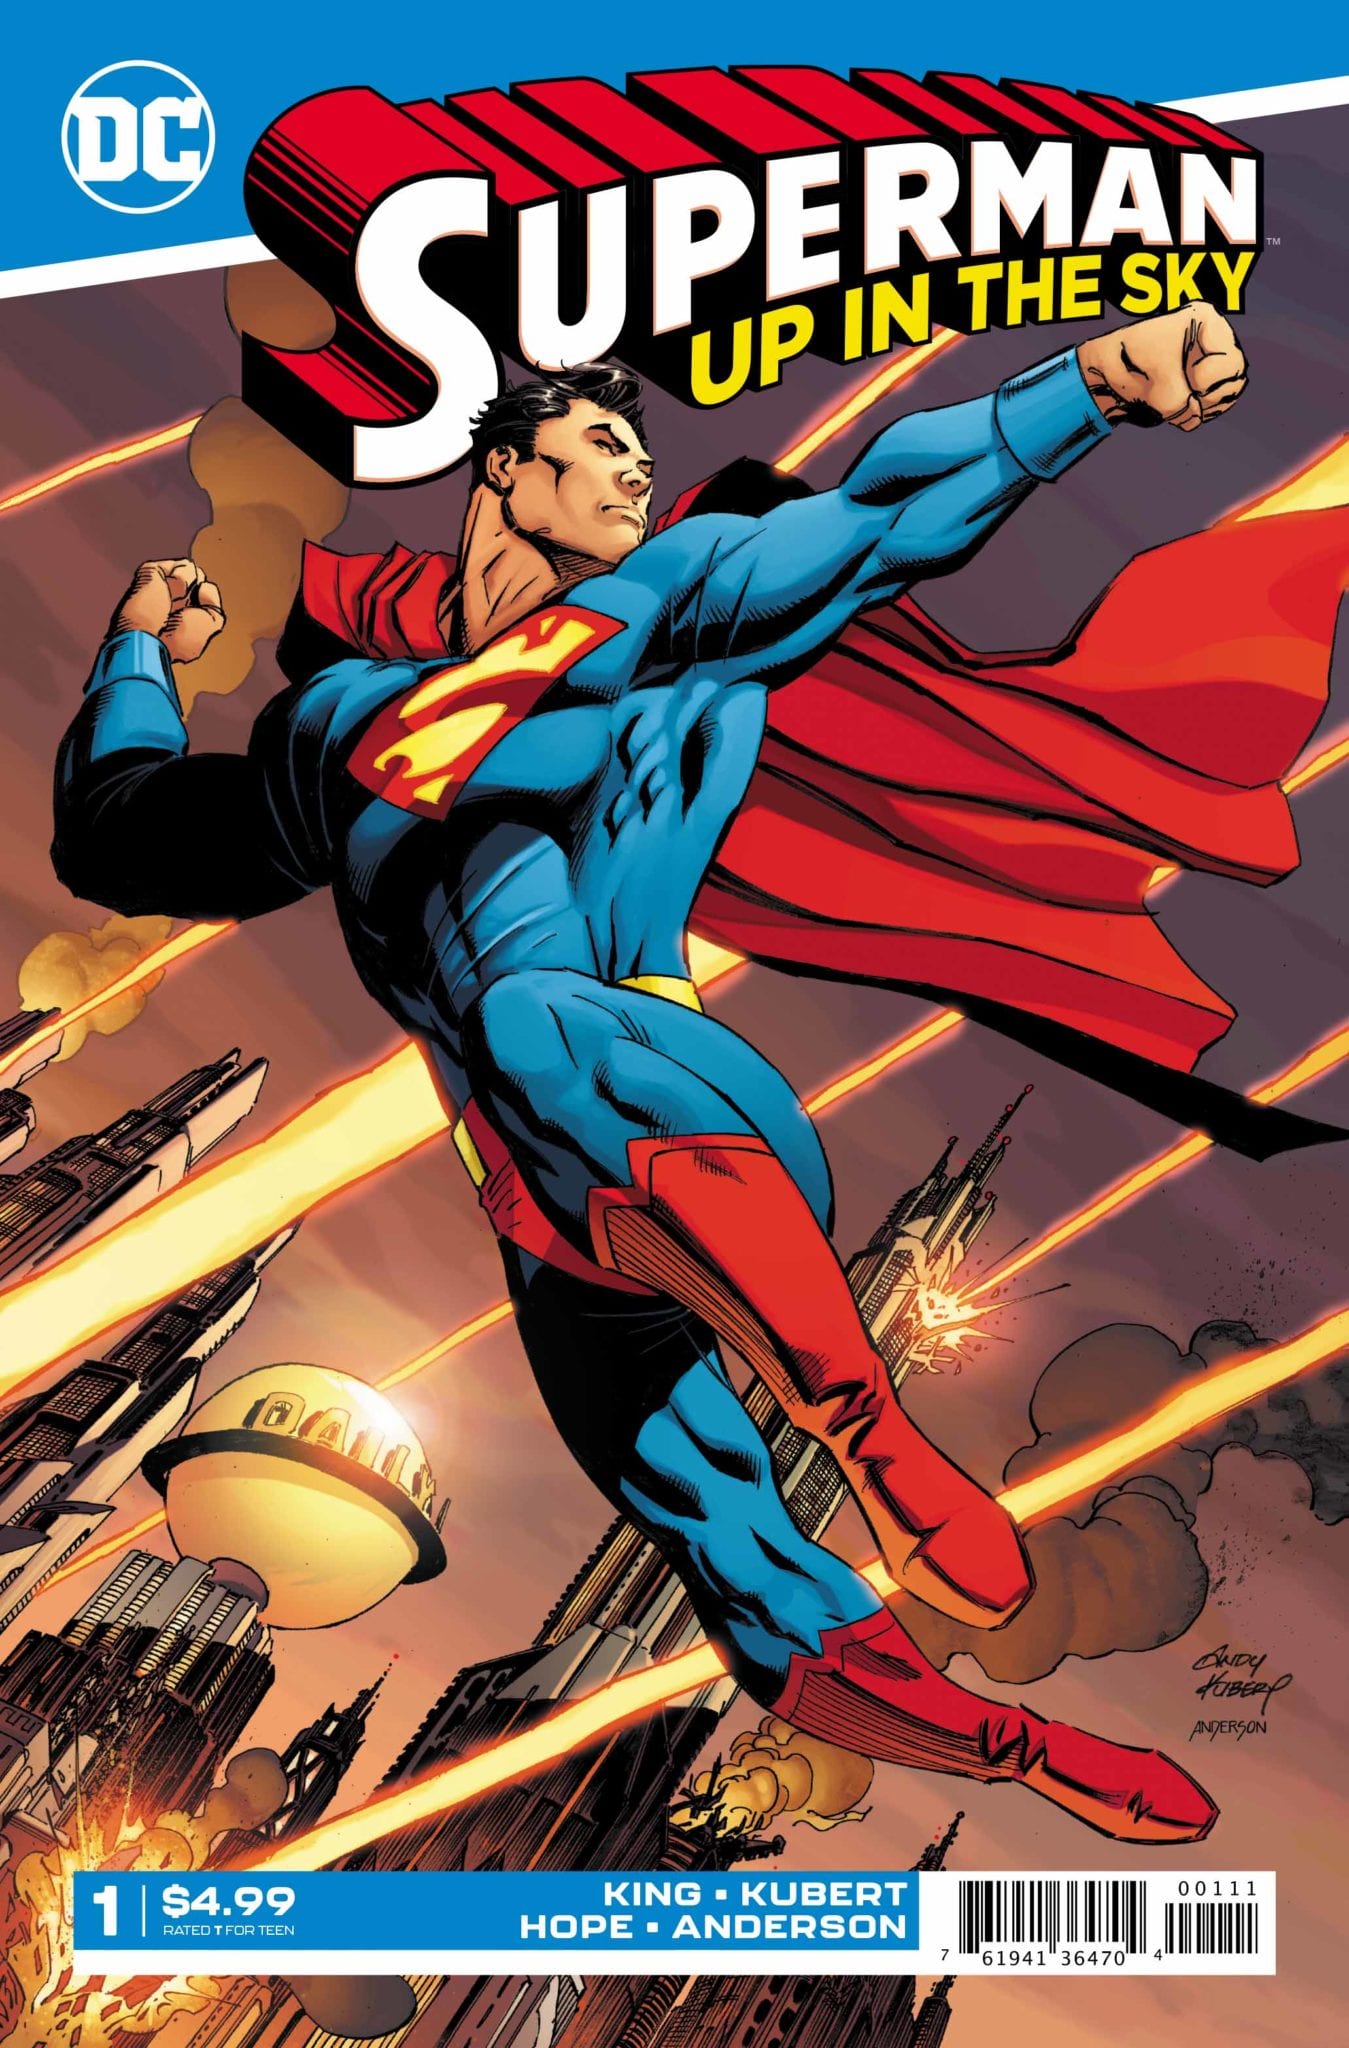 Superman: Up in the Sky #1 review: it's a bird, it's a plane of existentialism